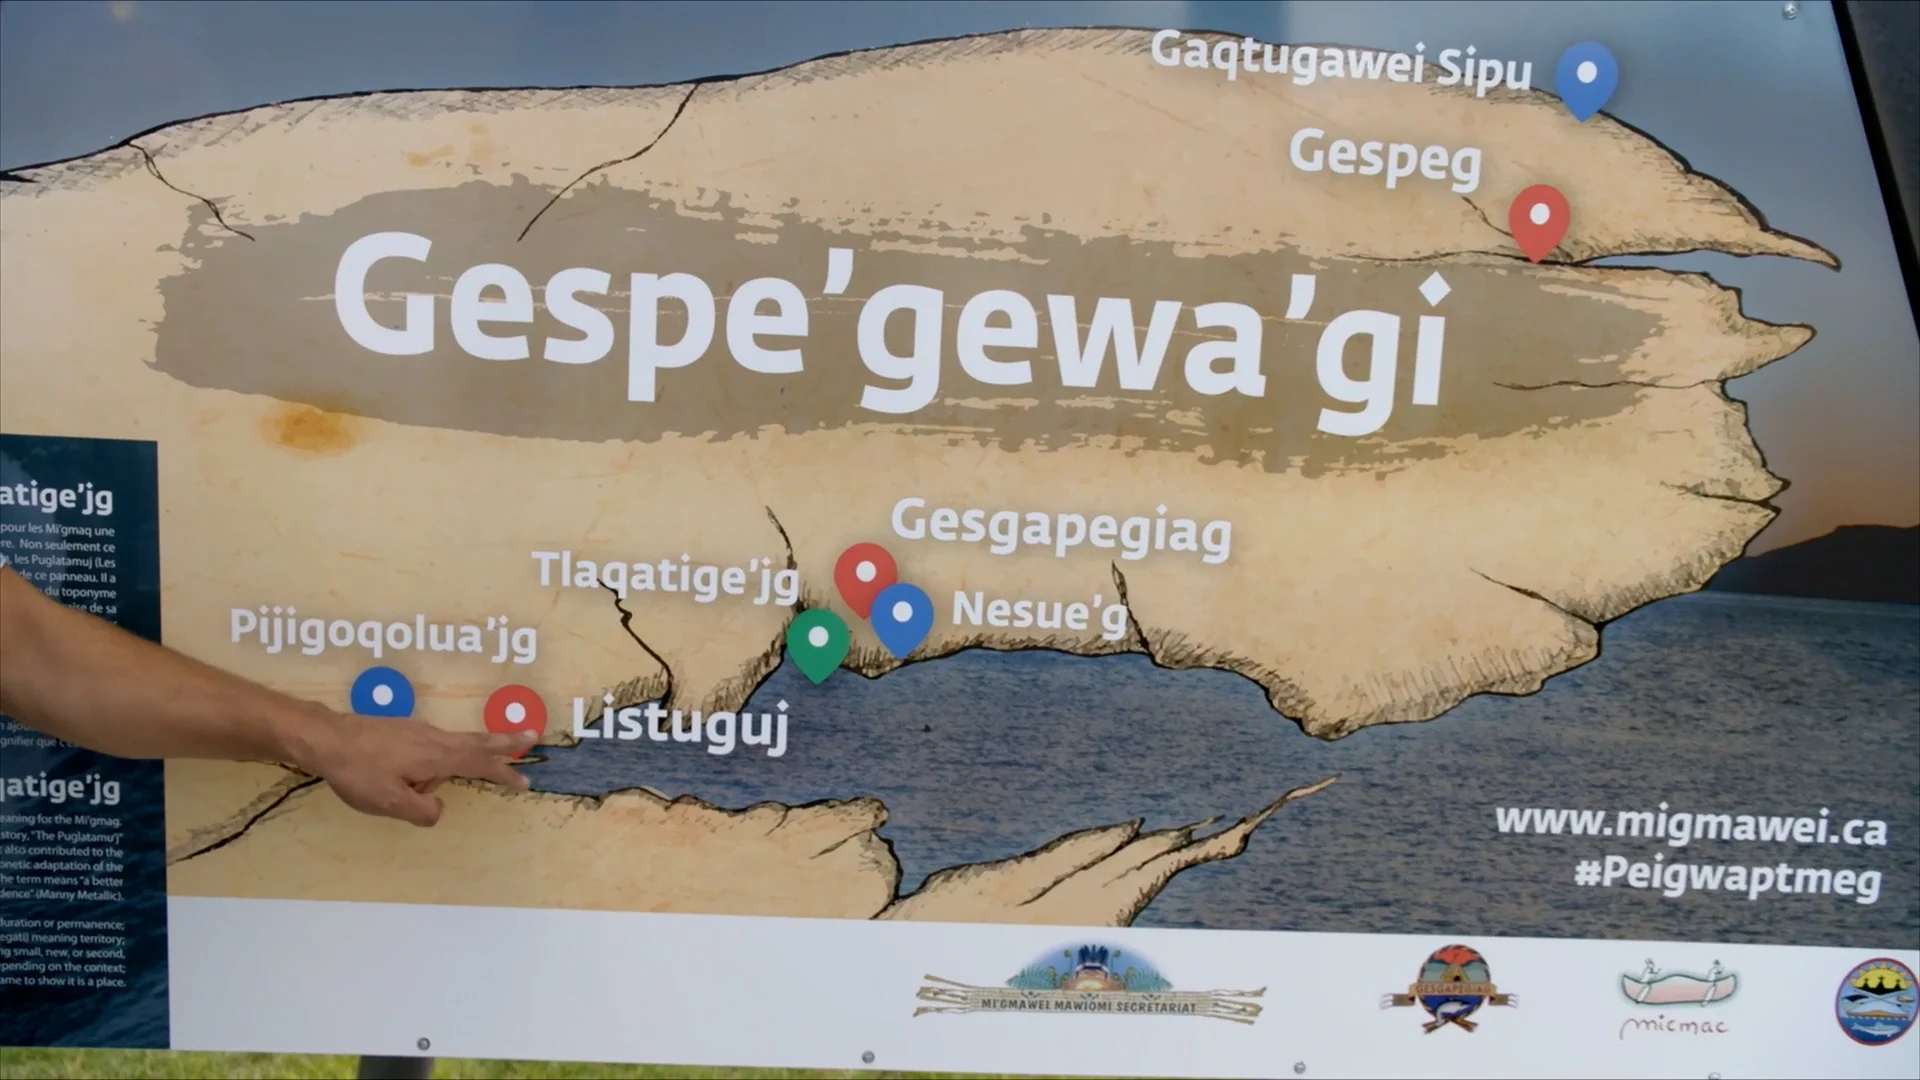 The three communities of the Mi'gmaq are marked with red locators on the Gespe'gewa'gi map. (Power to the People)